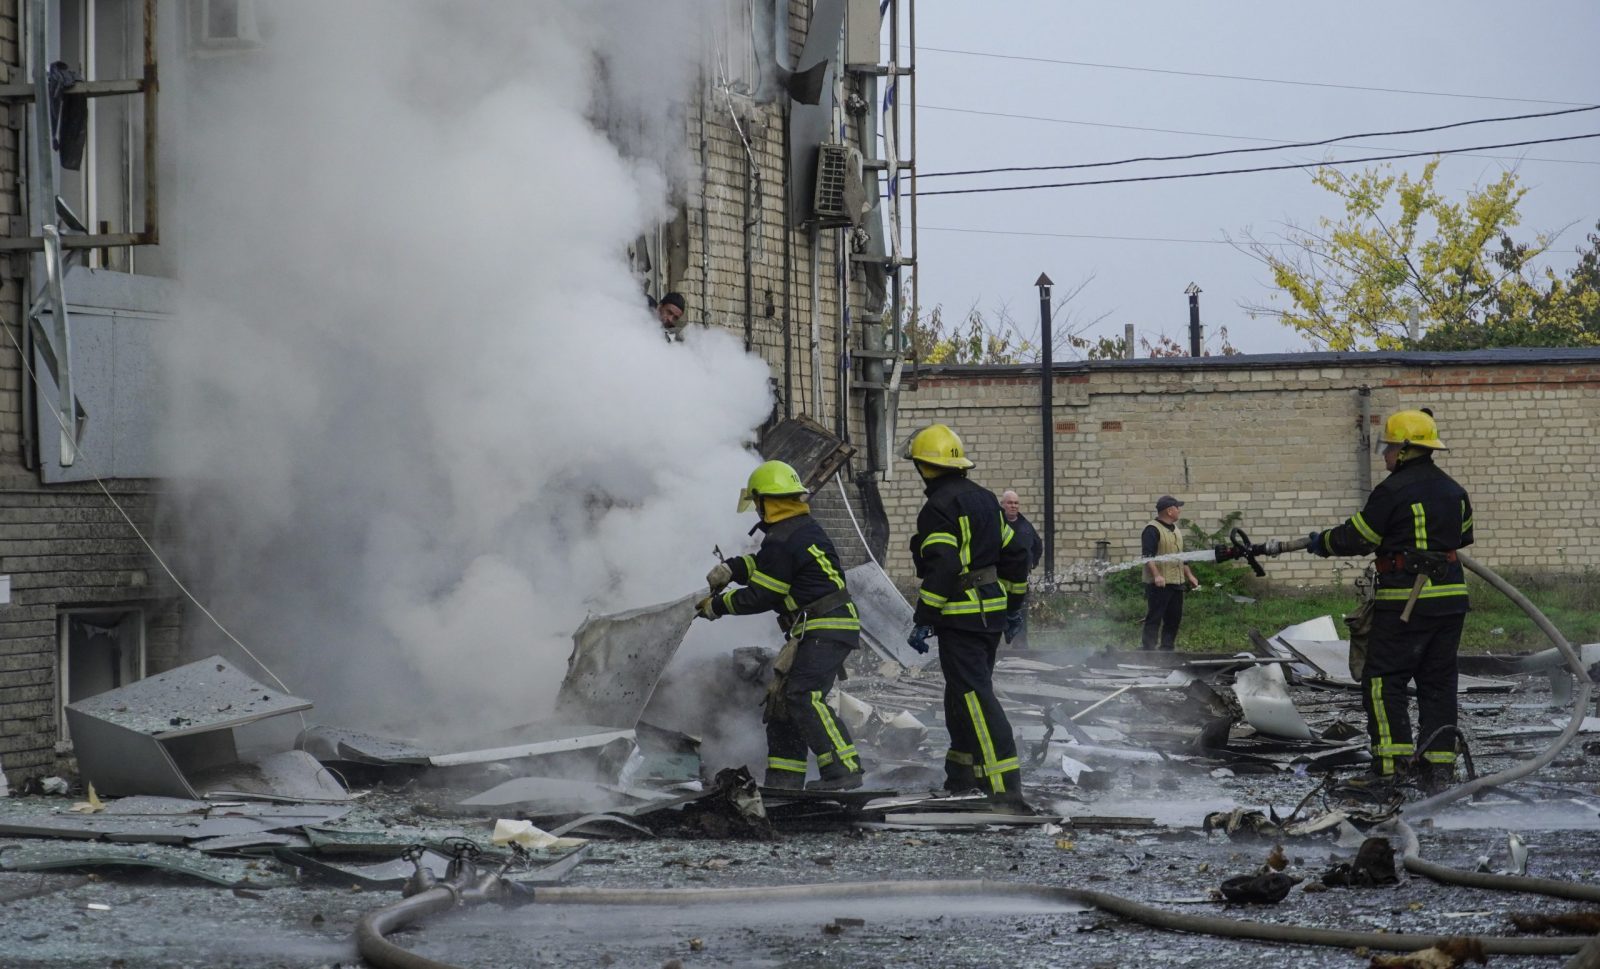 epa10264089 Russian firefighters extinguish a fire at the site of a car explosion near the 'ZaTV' broadcaster building in Melitopol, Zaporizhzhia region, southeastern Ukraine, 25 October 2022. At least five people were injured after a car exploded near the building of the 'ZaTV' television company in the city of Melitopol, said journalist Alexander Malkevich, a member of the Russian Public Chamber who oversees the work of the television company.  EPA/STRINGER